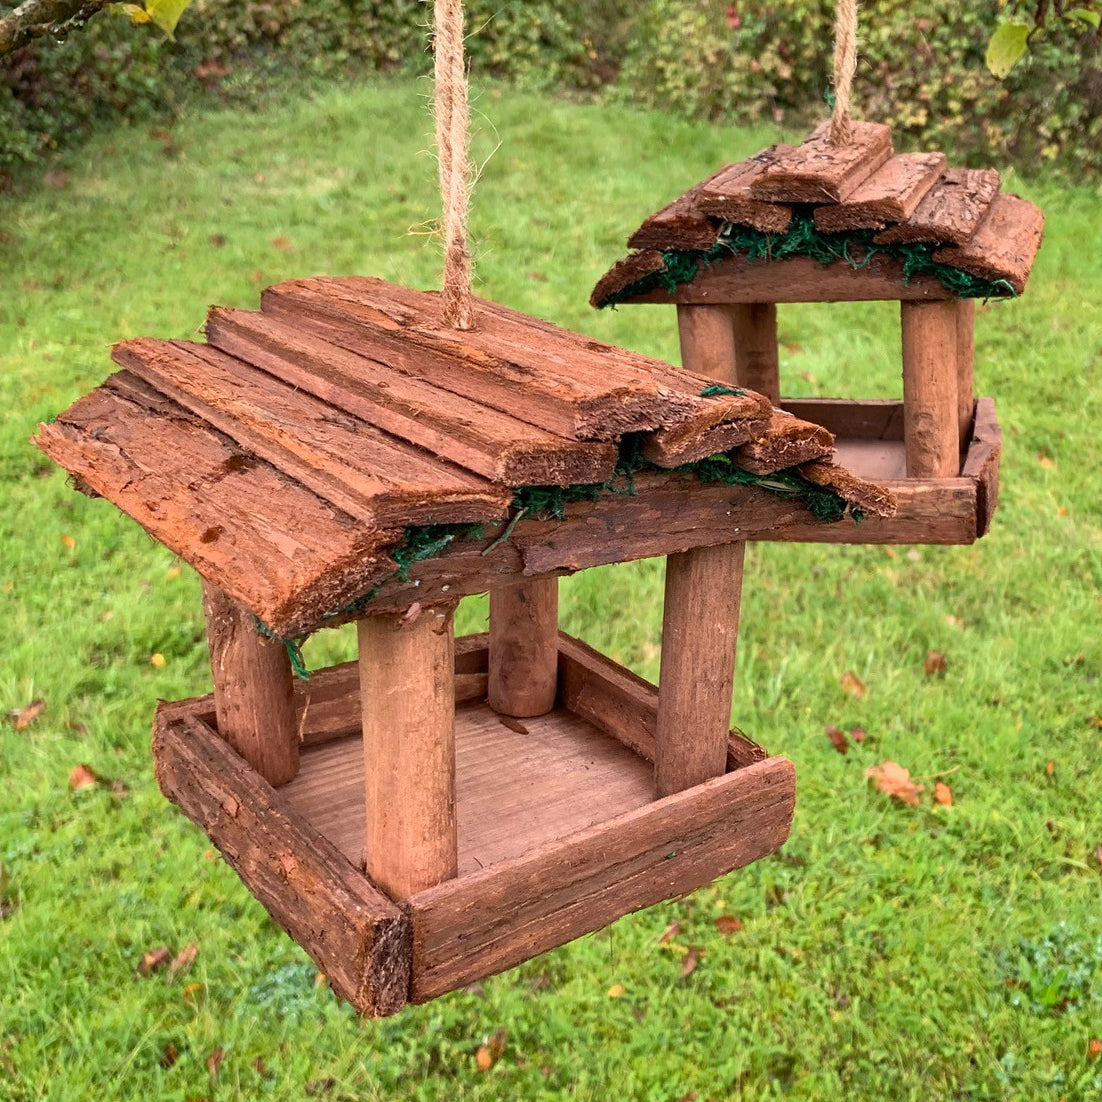 Factory Second - Set of 2 Hanging Wooden Bird Table Feeders